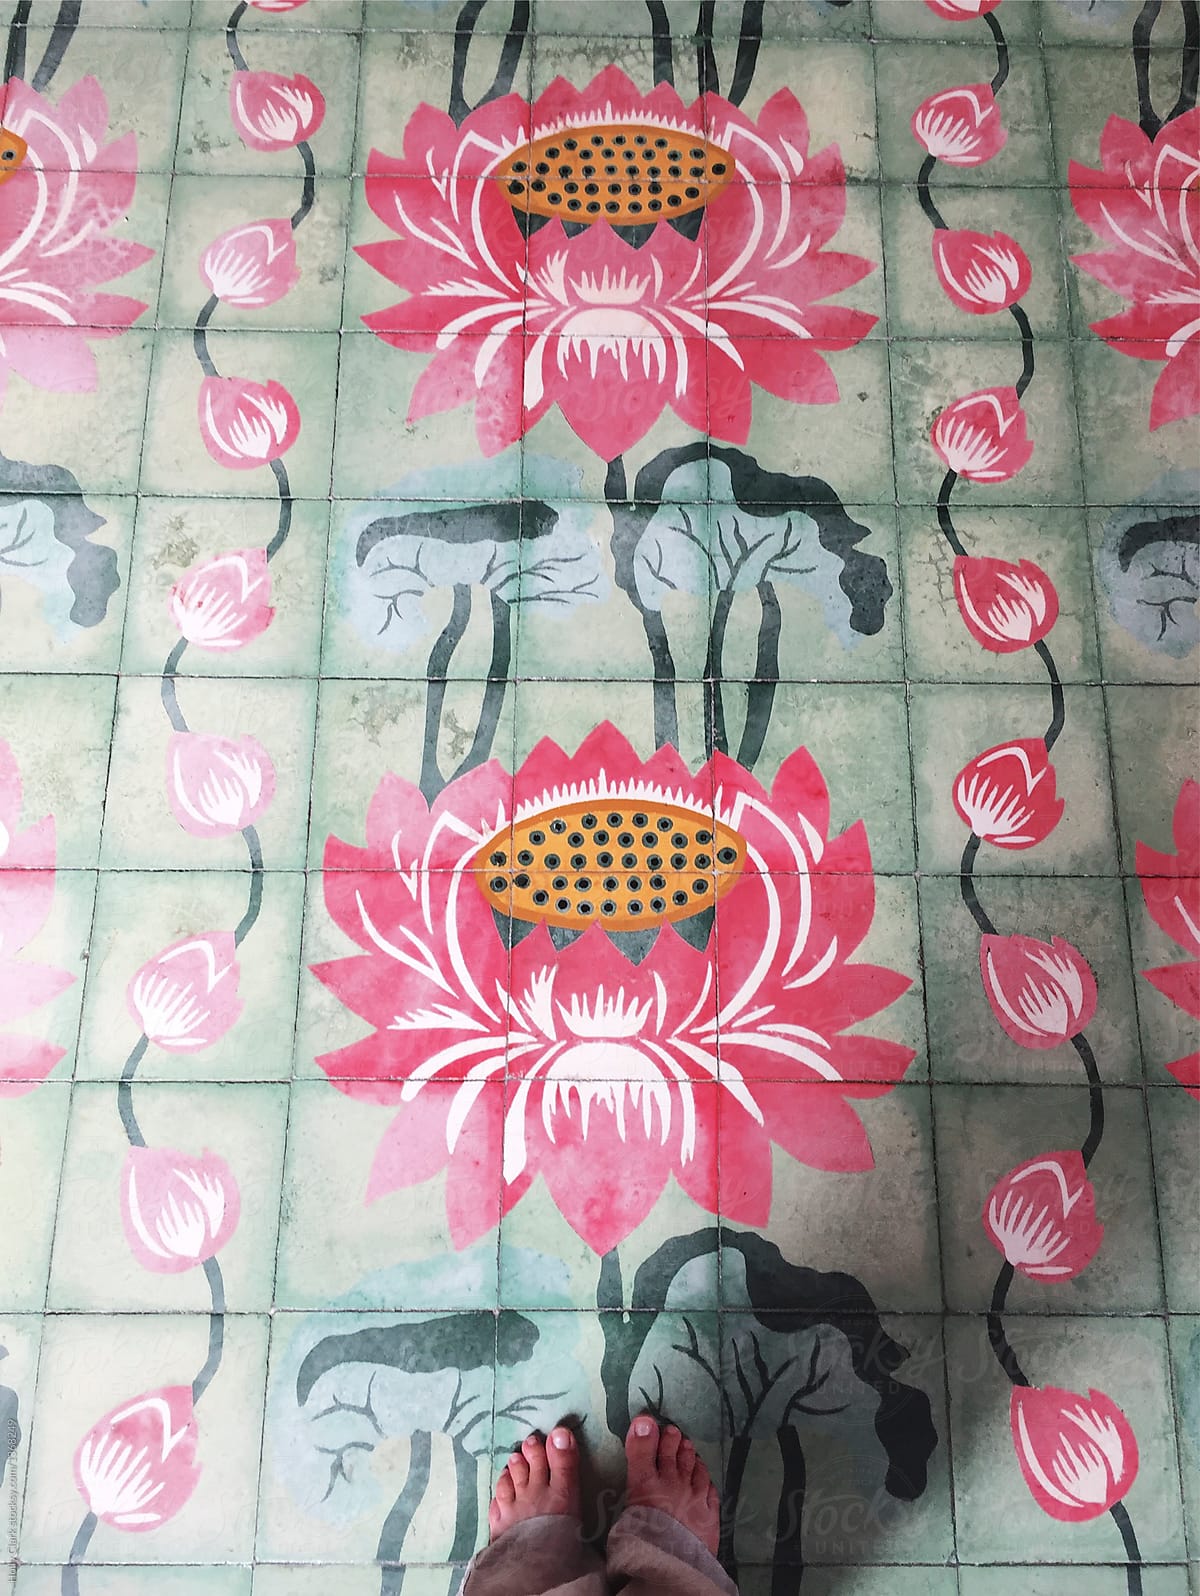 Bare Feet On Beautiful Pink And Green Lotus Tiles In Temple by